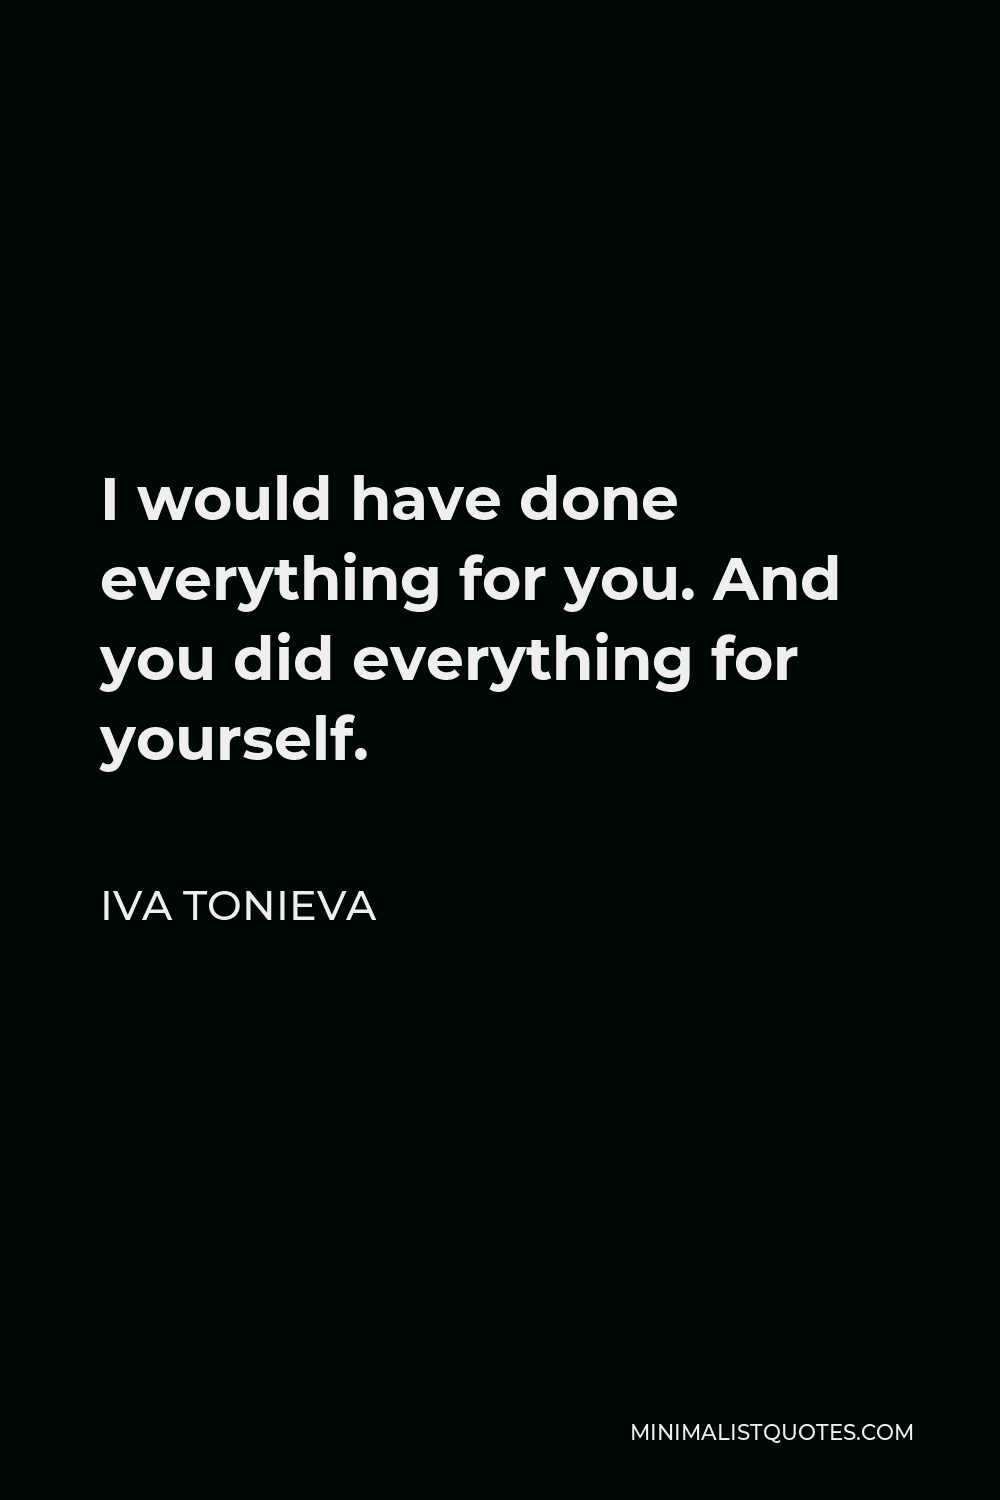 Iva Tonieva Quote - I would have done everything for you. And you did everything for yourself.